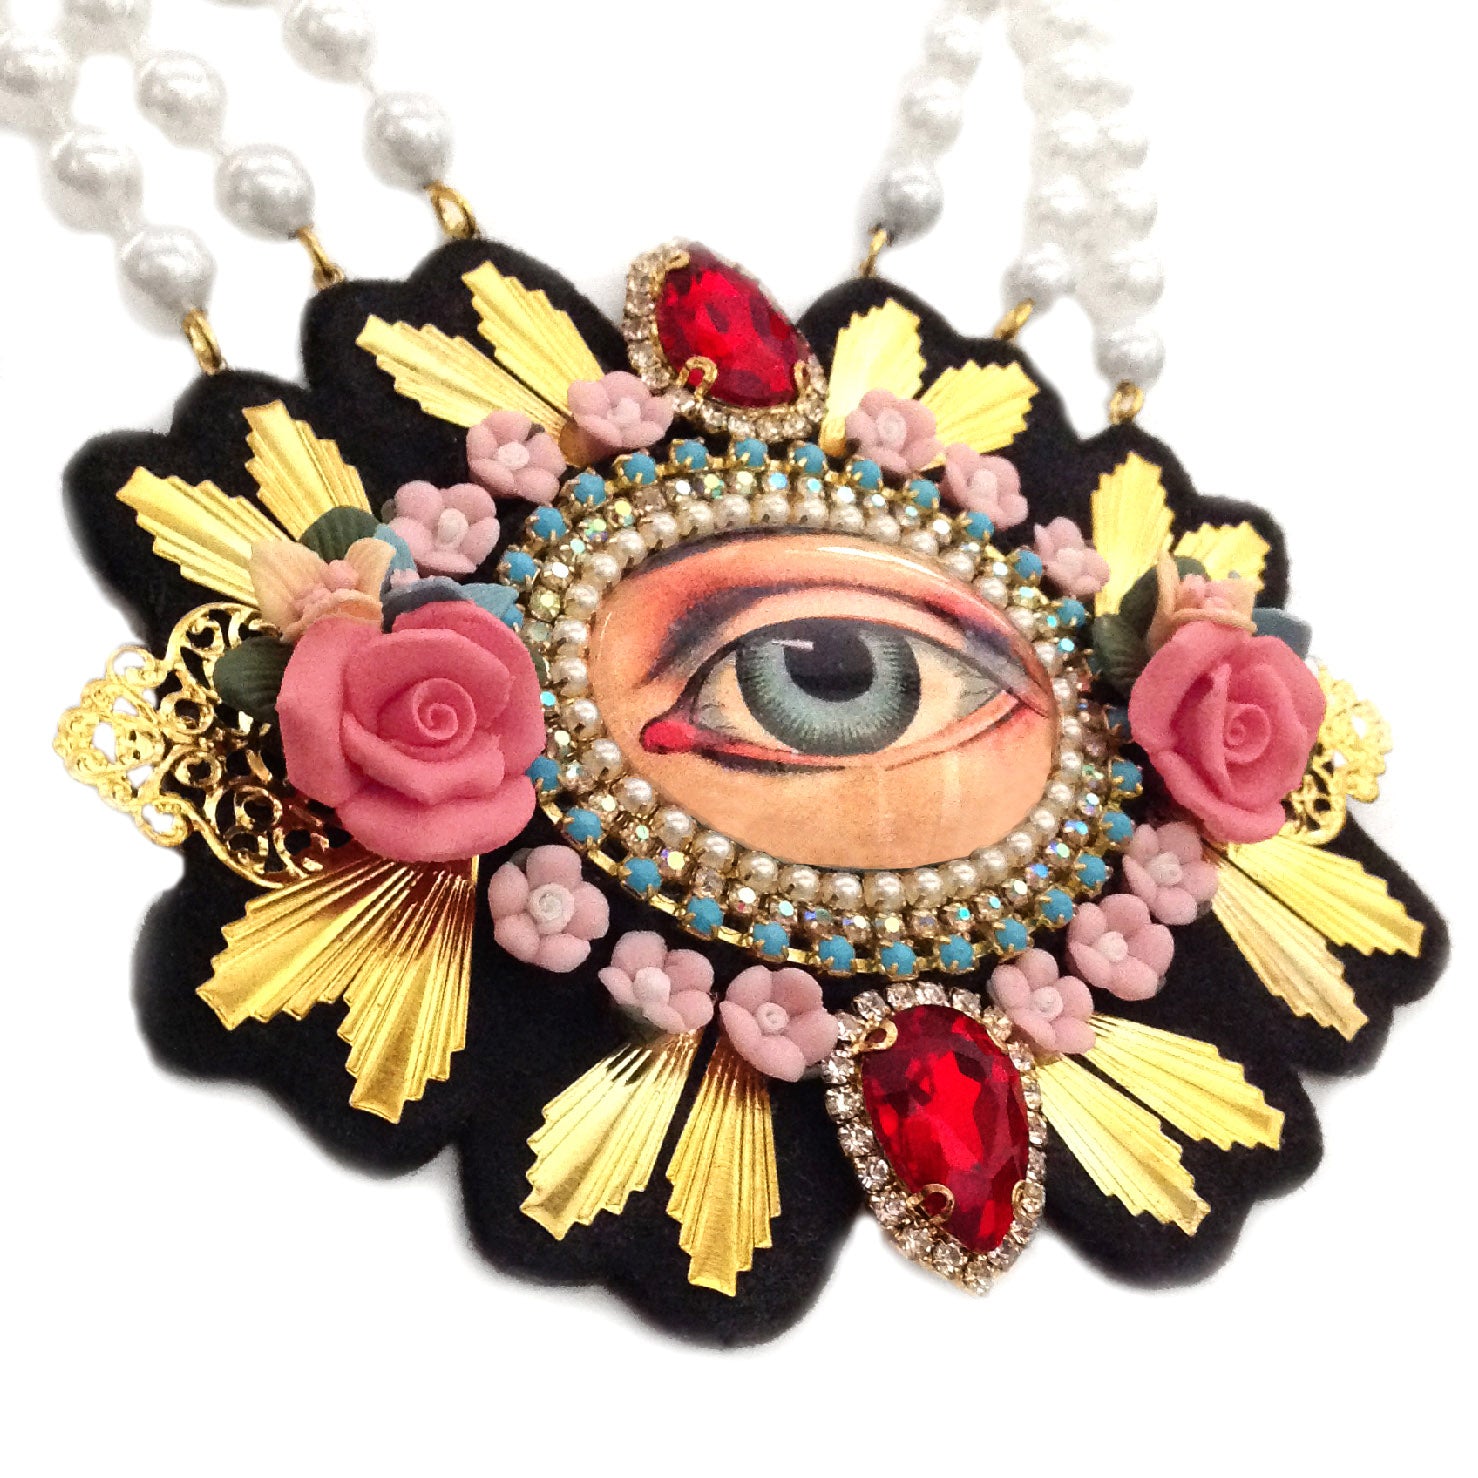 mouchkine jewelry a made in france haute couture eye necklace with ceramic flowers